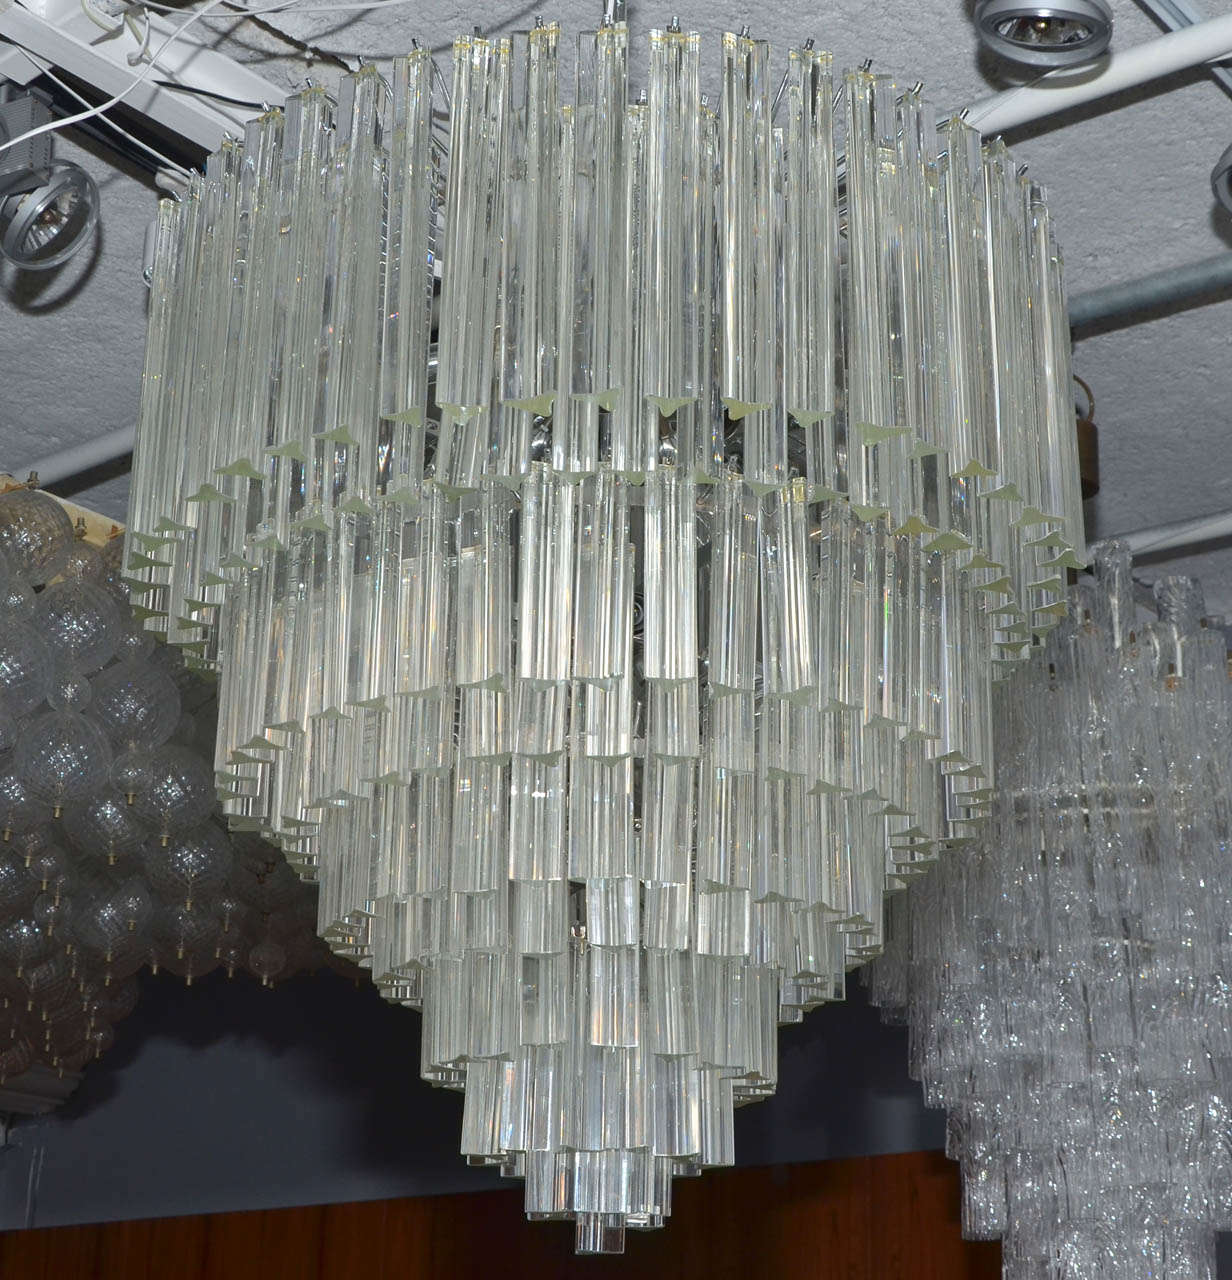 1970s chandelier by Venini. Ten rows of crystal pendants. Acquired from a Sheraton hotel (seven pieces in different size). A real vintage piece with high quality crystals. Photos of the metallic structure available on request. Wired for European use.